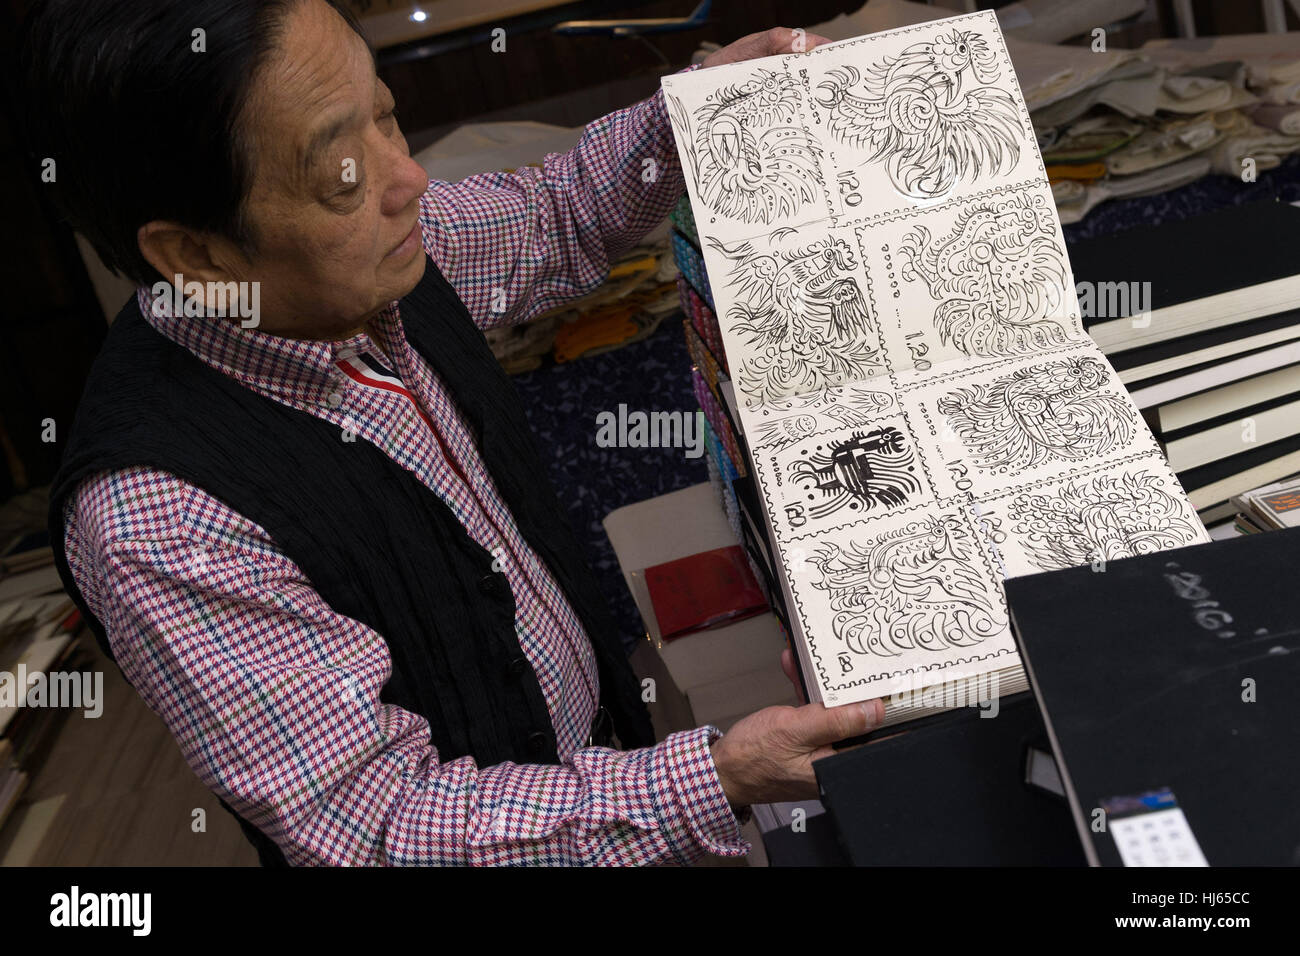 (170126) -- BEIJING, Jan. 26, 2017 (Xinhua) -- Chinese artist Han Meilin, 80, shows his sketches of roosters and hens for preparation of Chinese zodiac stamps for the upcoming Year of the Rooster at his studio in eastern district of Tongzhou in Beijing, capital of China, Jan. 24, 2017. Han, designer of the 2008 Beijing Olympic Games mascot "Fuwa," has just finished the design of Chinese zodiac stamps for the upcoming Year of the Rooster. The set of Chinese Lunar New Year rooster stamps, issued earlier this month, contain two items showing a rooster striding proudly and a hen looking after her Stock Photo